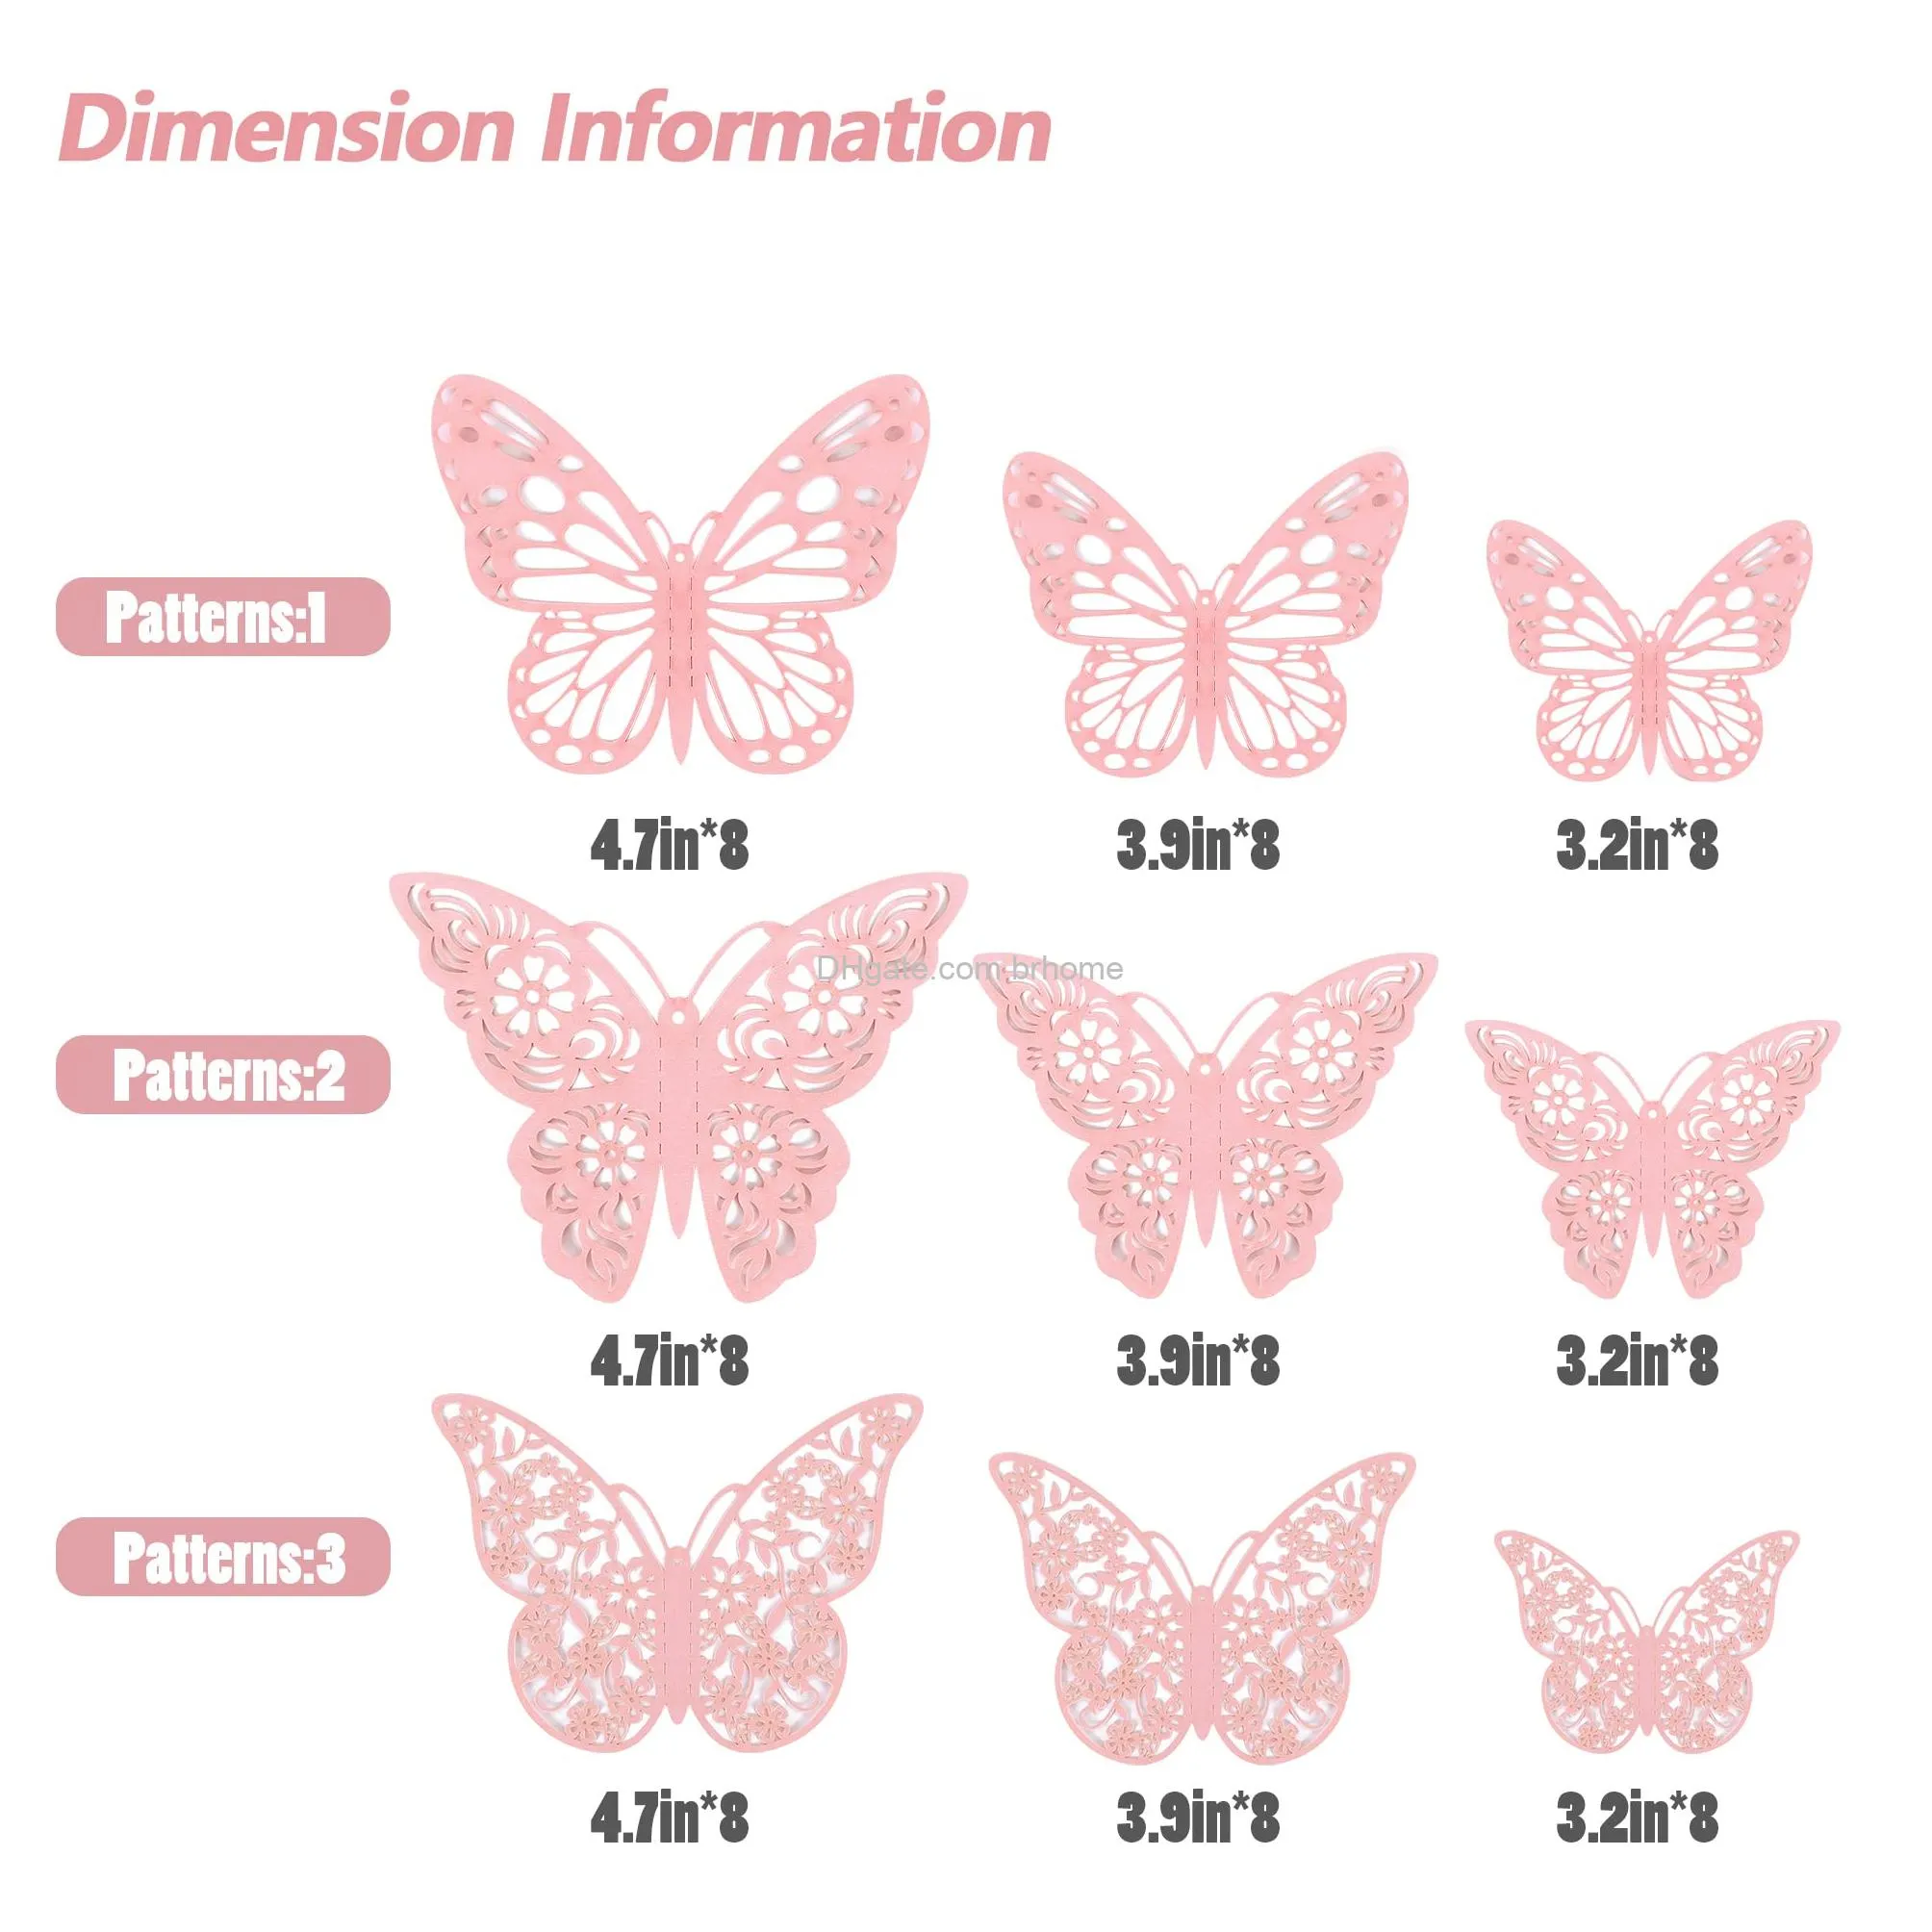 3d butterfly wall decor 3 sizes 3 styles removable stickers wall decor room mural for party cake decoration metallic fridge sticker kids bedroom nursery classroom wedding decor diy gift pink